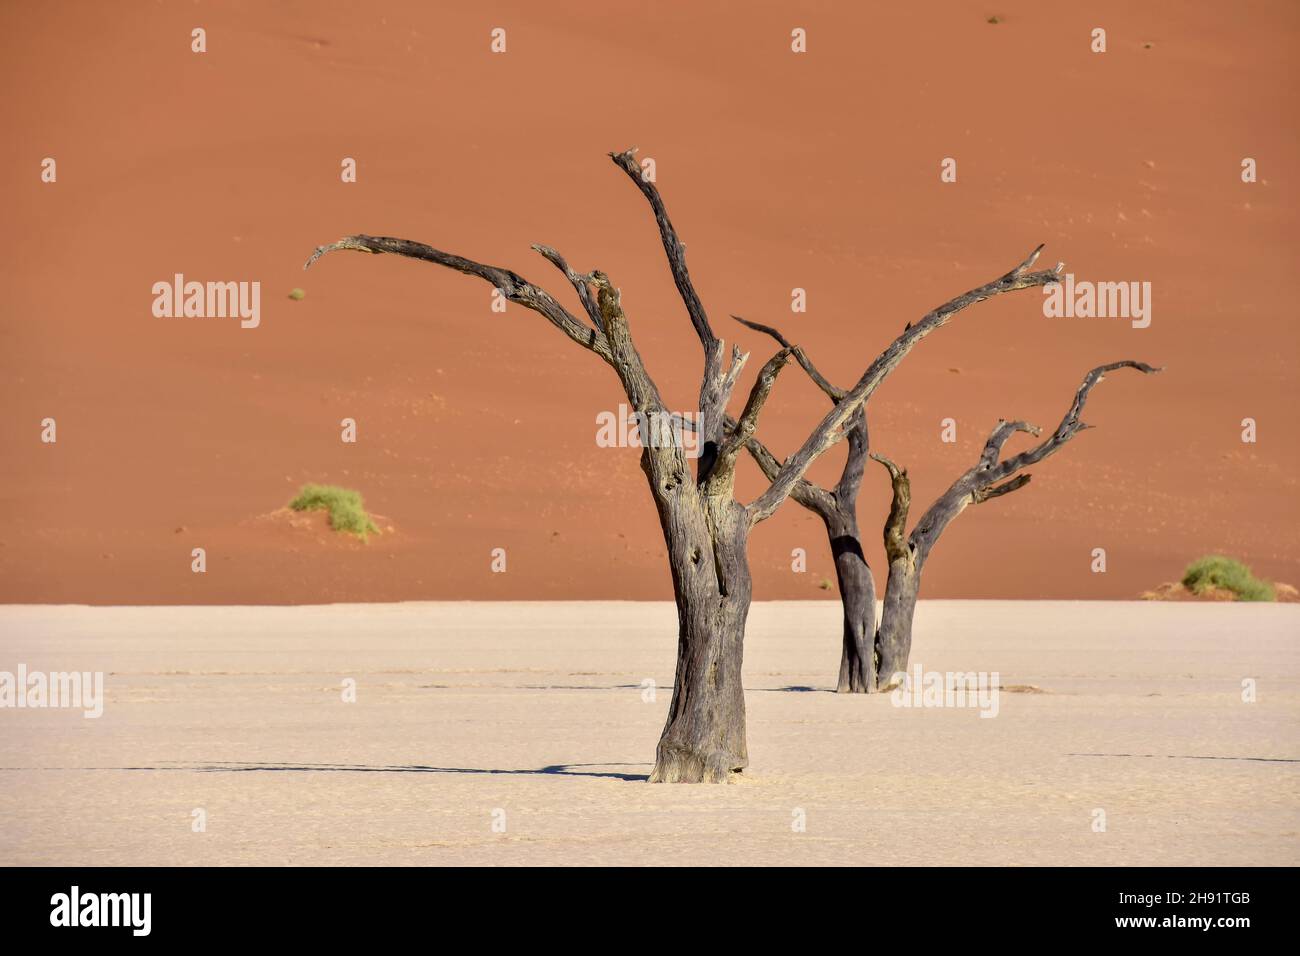 Dead trees in the dead or dry lake near the famous sand dunes in the Namib-Naukluft park area in Namibia Southern Africa Stock Photo